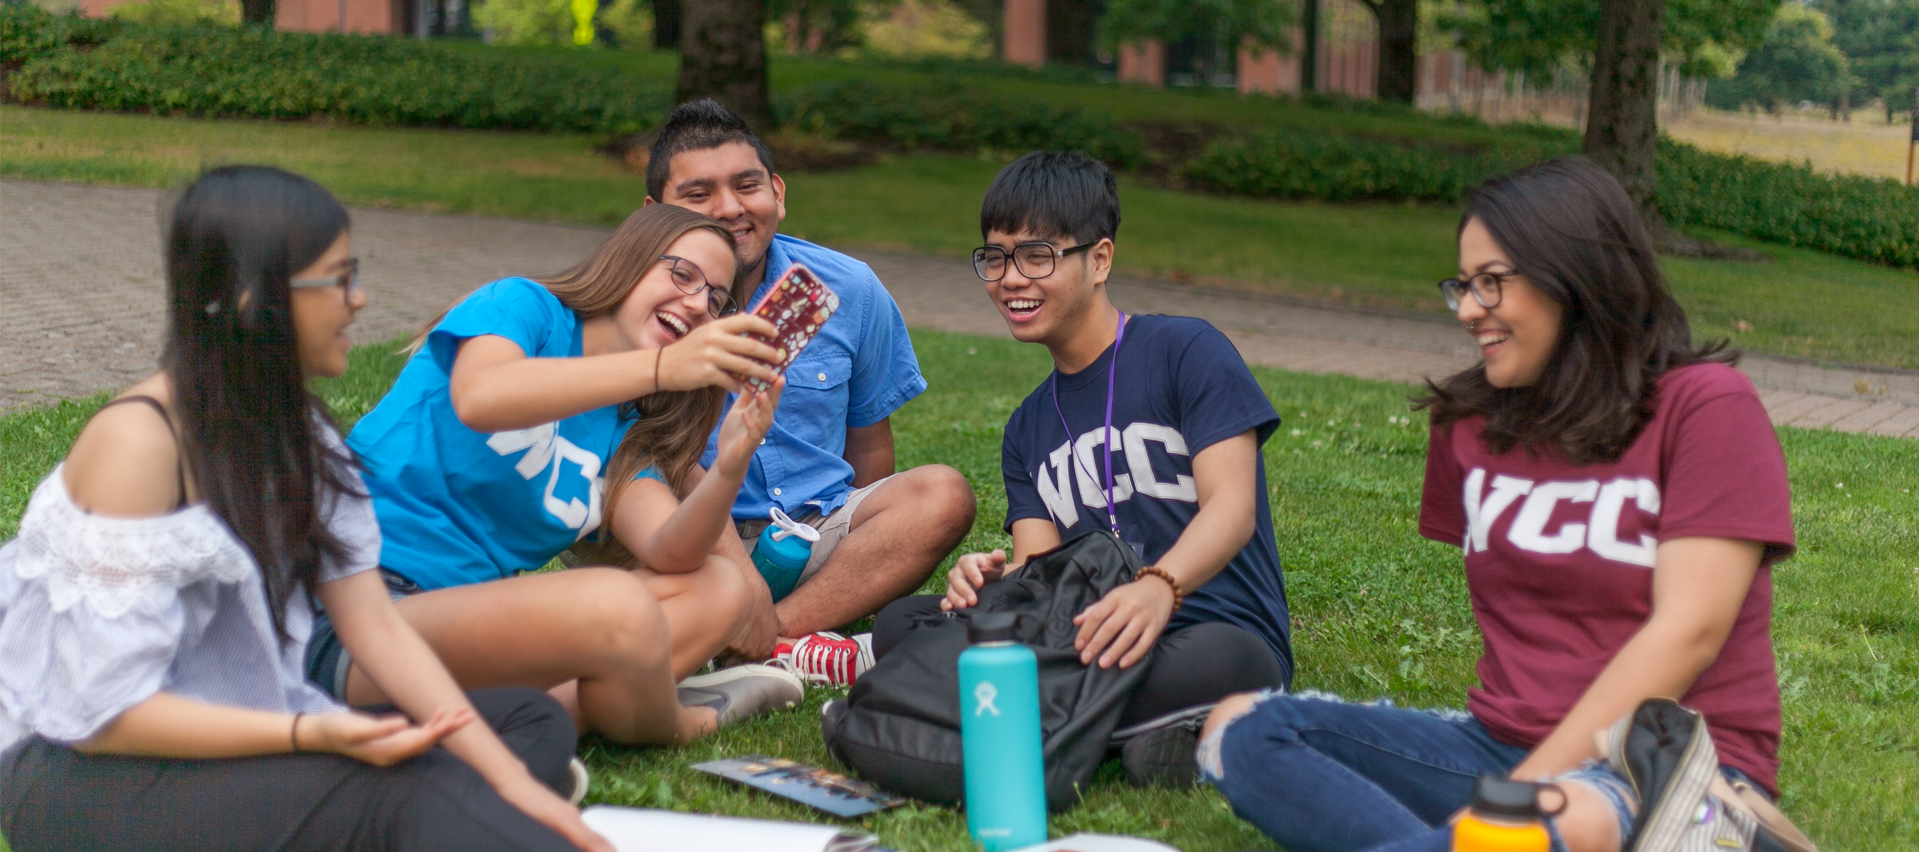 Five WCC students sitting on the lawn in the summertime looking at something on one of the student's phones.